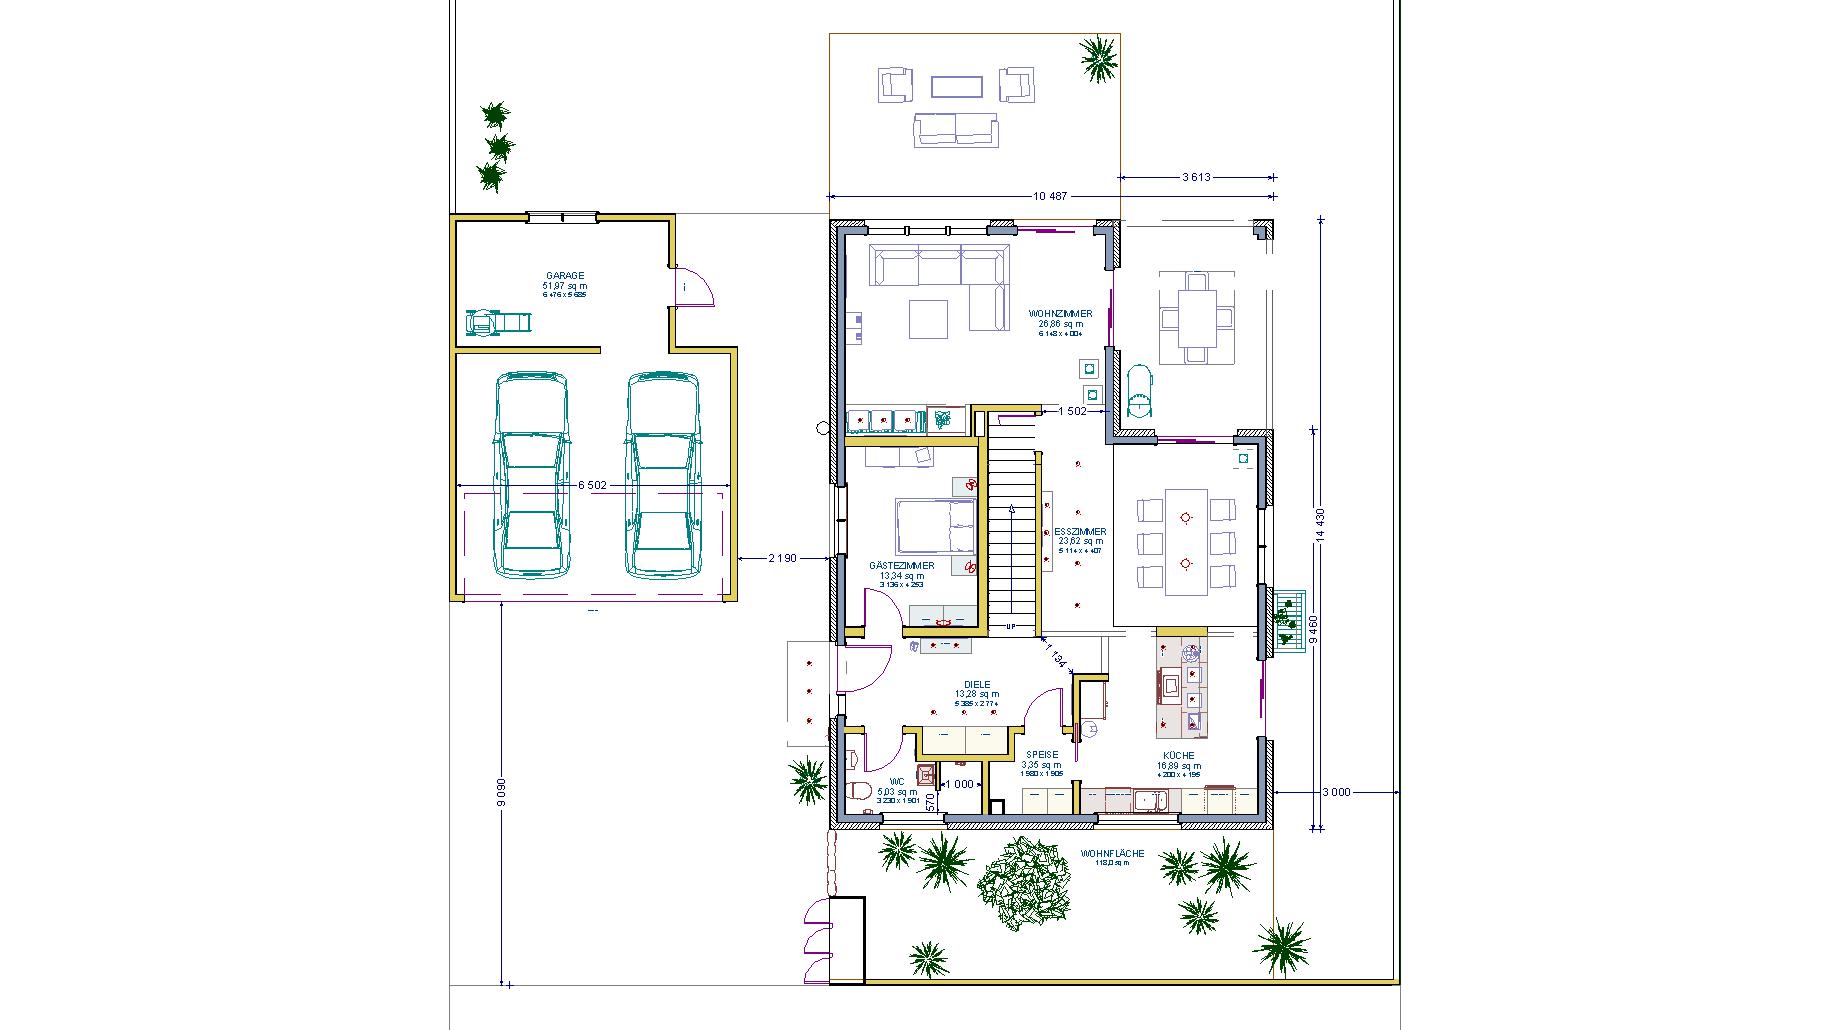 haus_plan_overview_2013-08-01